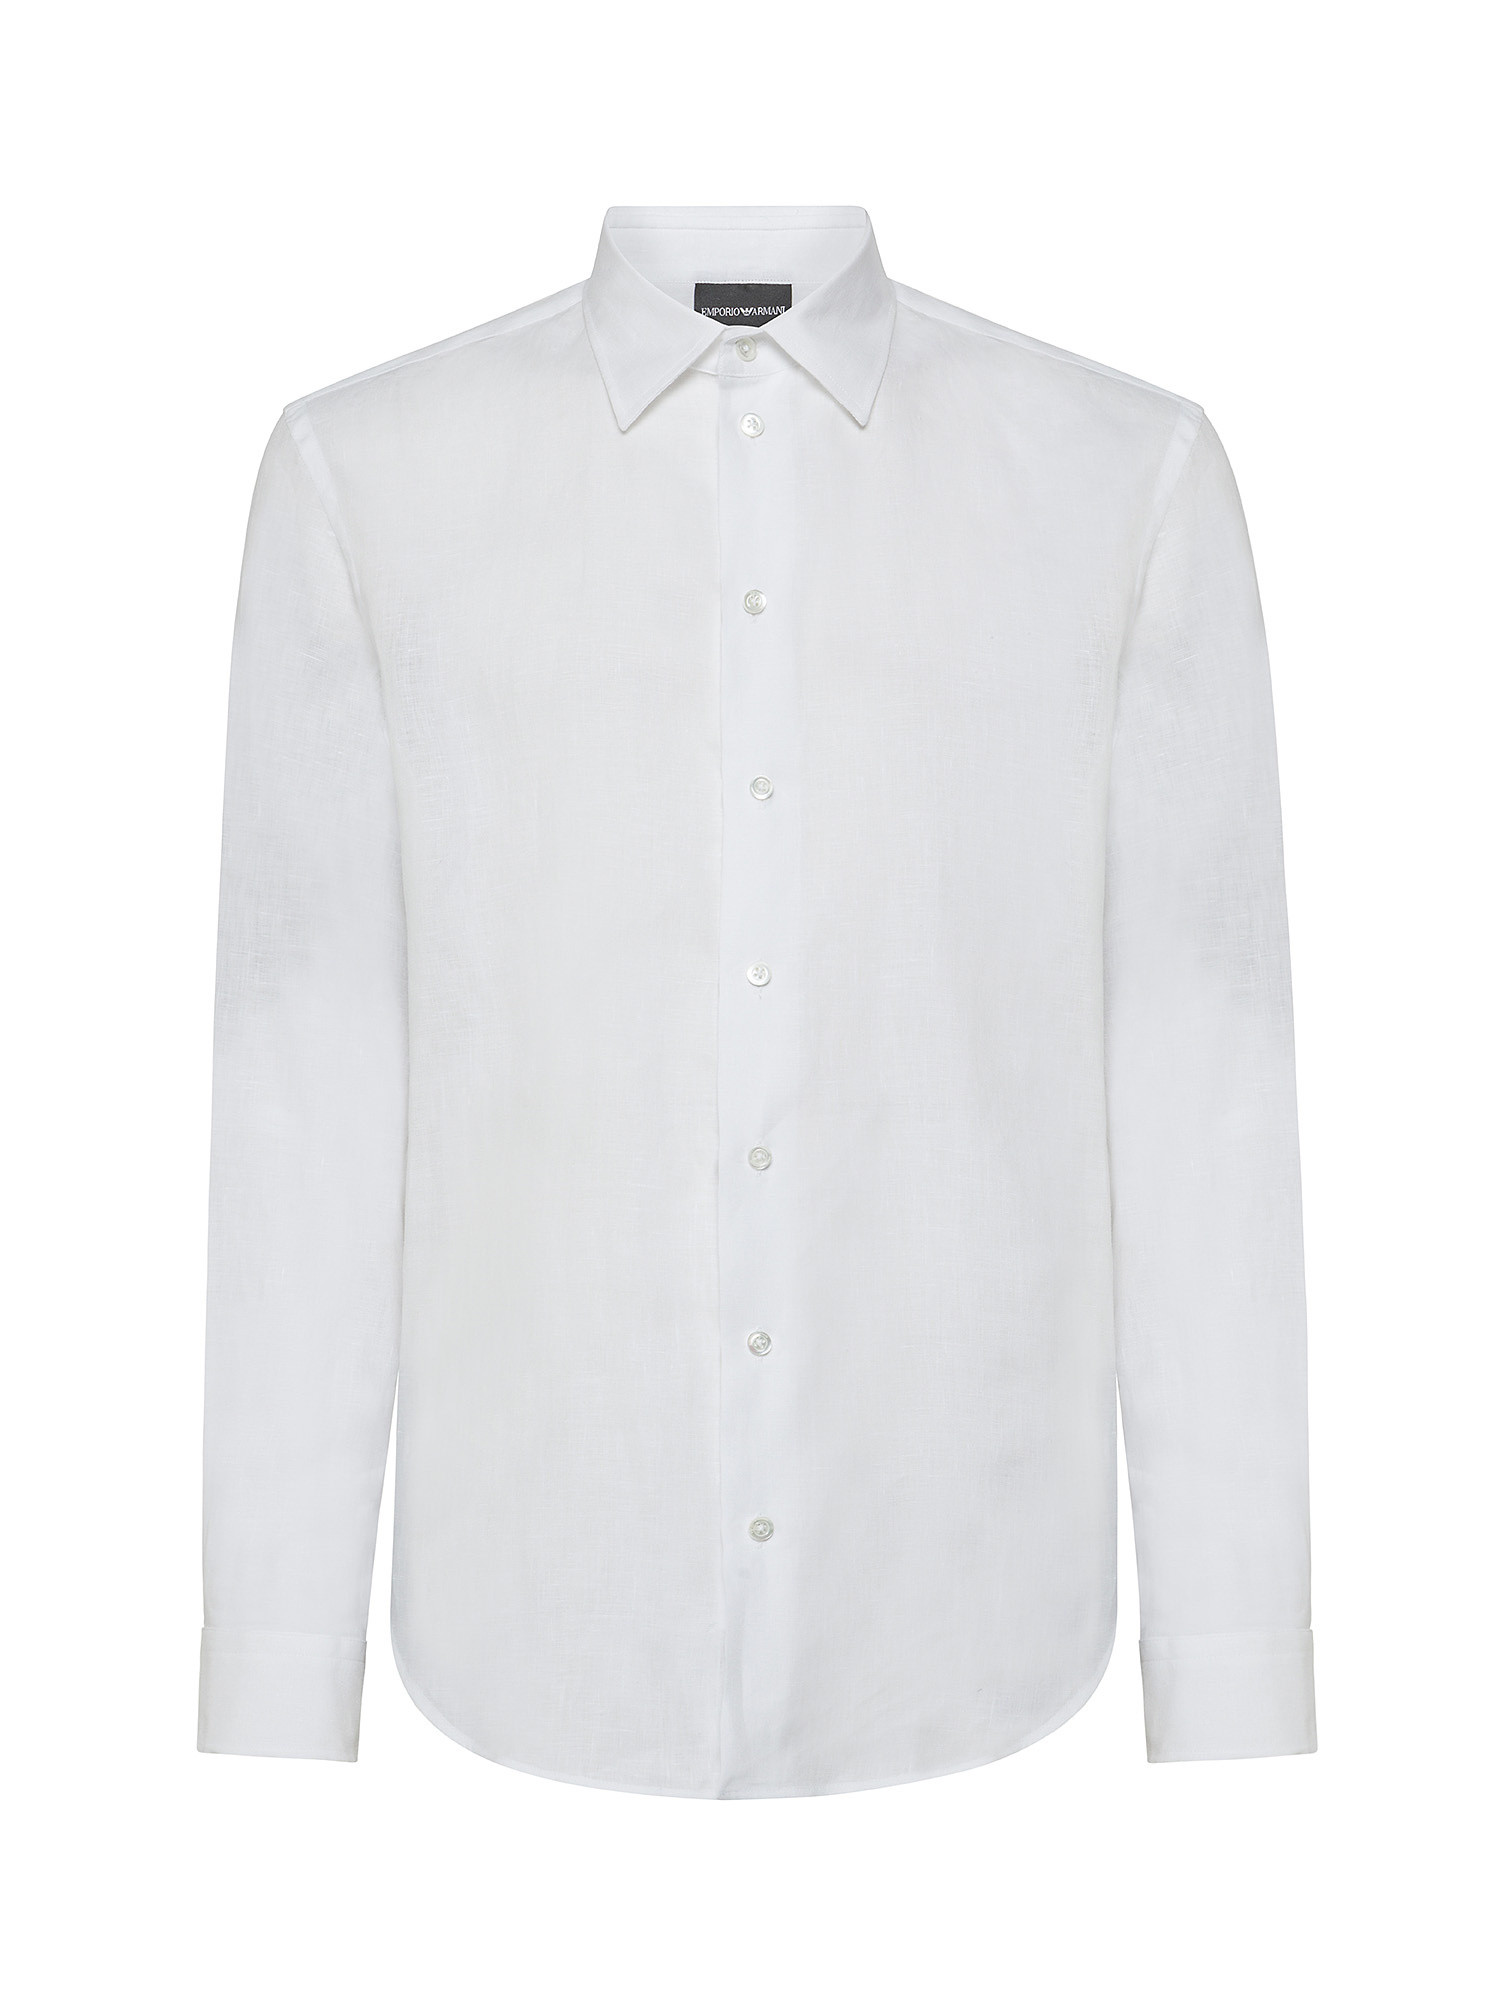 Emporio Armani - Relaxed fit shirt in pure linen, White, large image number 1